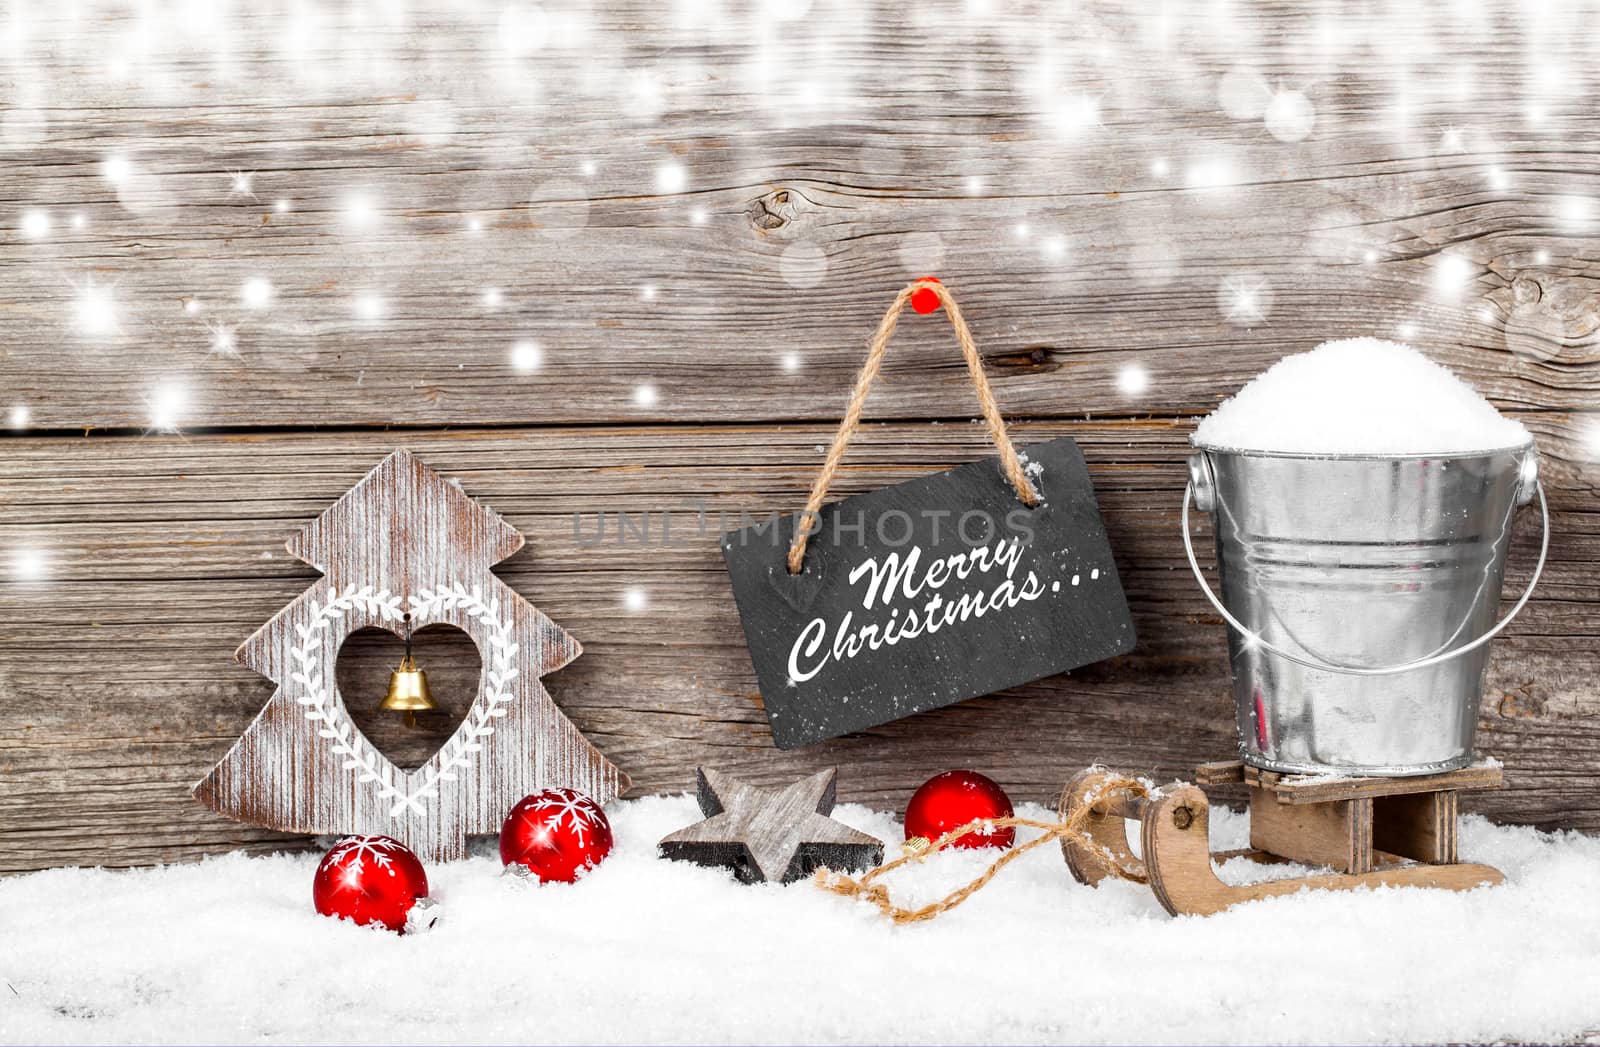 Snow in a bucket on a sled, on wooden background, with Christmas by motorolka